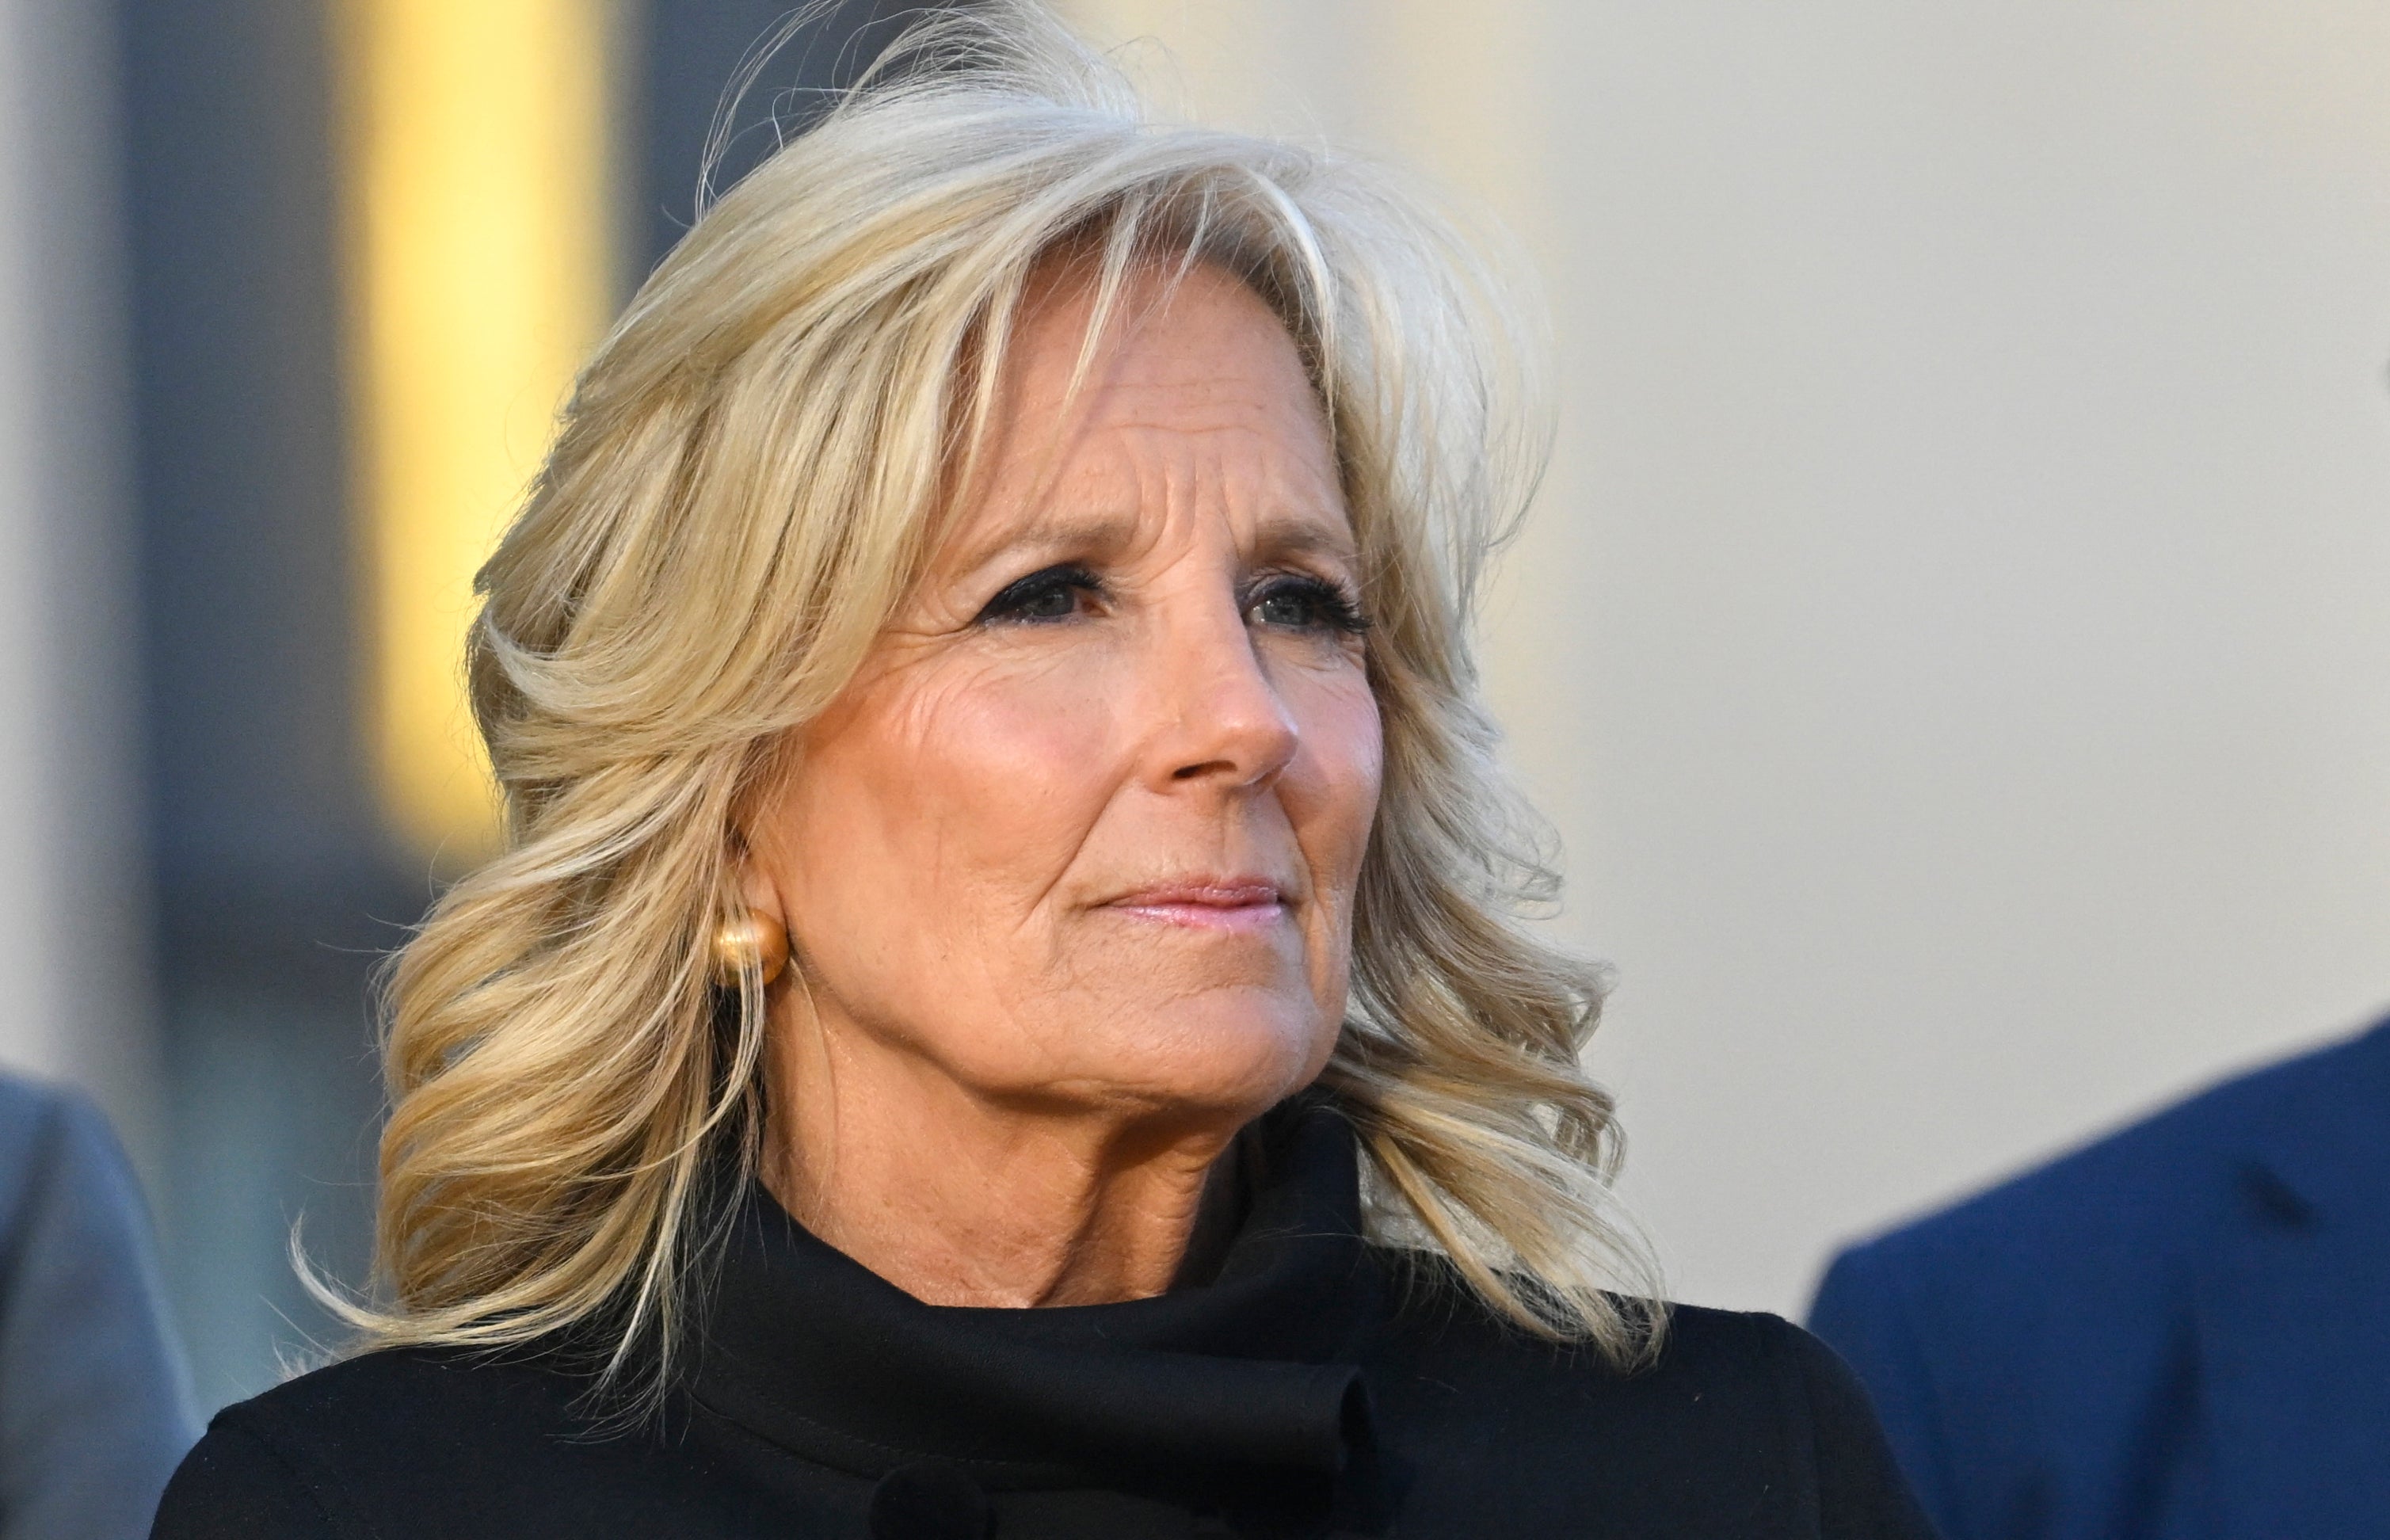 Jill Biden will be repesenting the US president at the King’s coronation